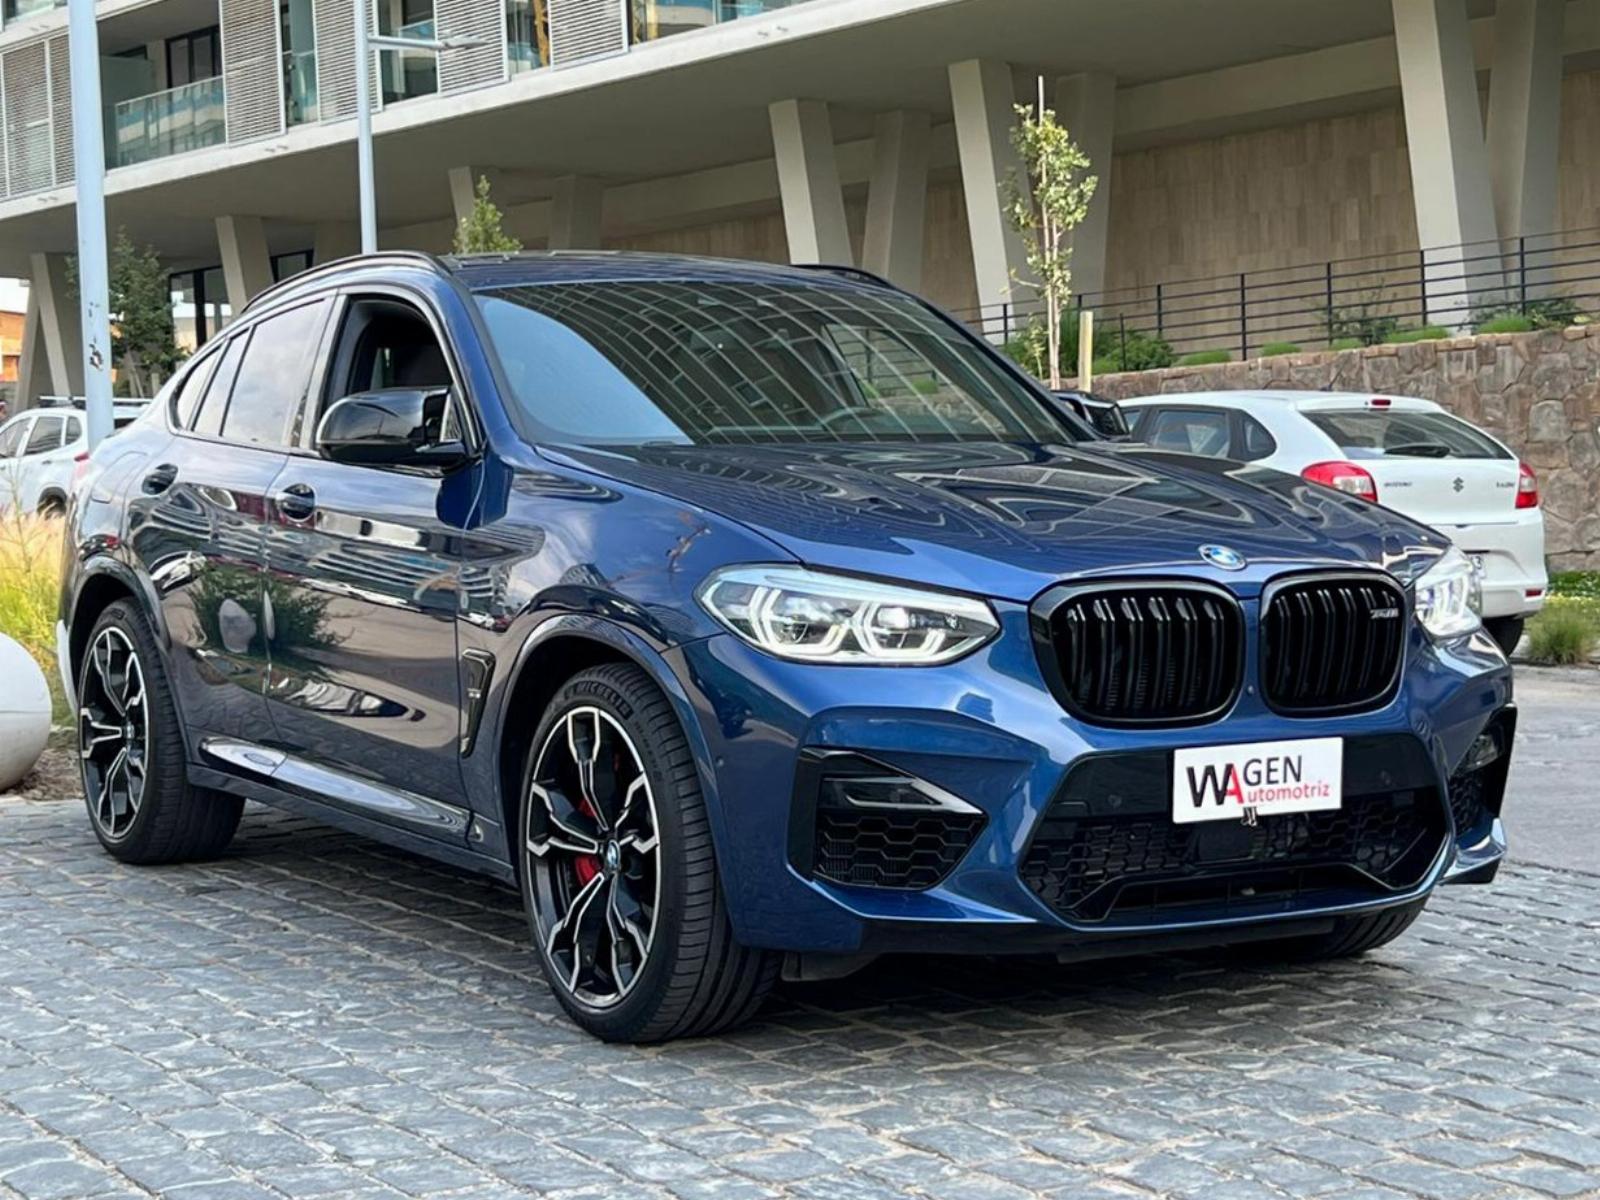 BMW X4 M 2021 COMPETITION 3.0 510 HP - FULL MOTOR